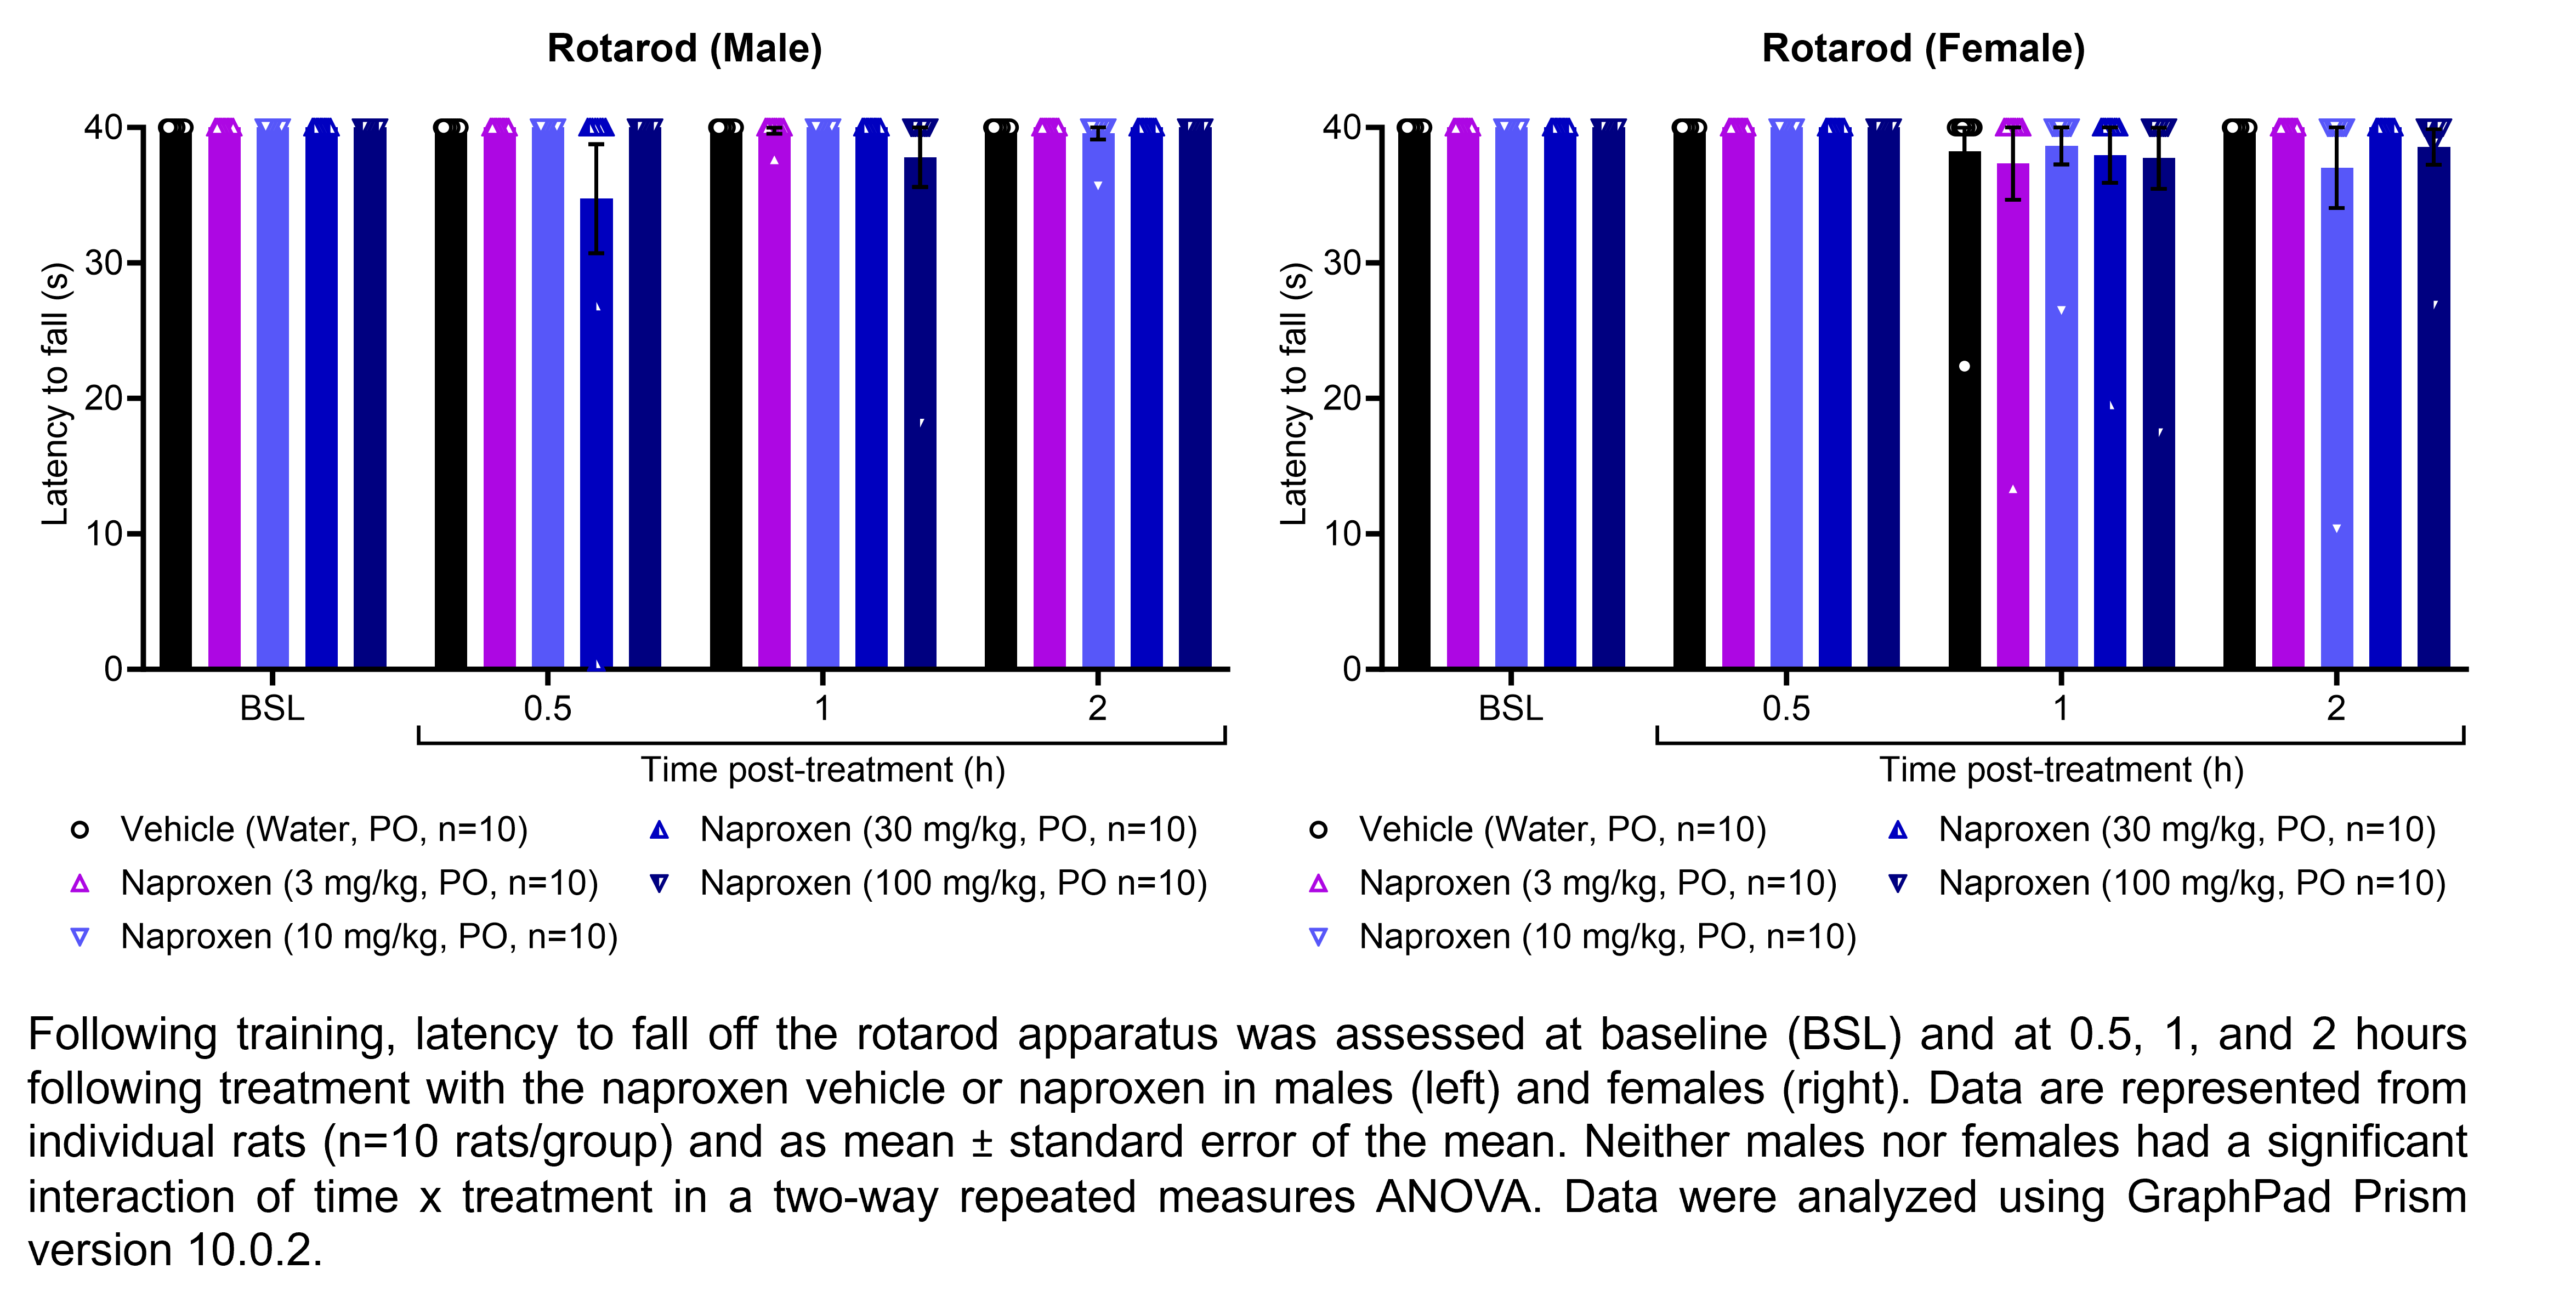 Two graphs show the latency for male or female rats to fall off a rotarod apparatus. Responses are shown at the following time points: baseline (before treatment) and at 0.5, 1, and 2 hours after treatment with vehicle (water, delivered PO) or naproxen (3, 10, 30, or 100 mg/kg, delivered PO). There were 10 rats per group. Neither males nor females had a significant interaction of time x treatment in a two-way repeated measures ANOVA.